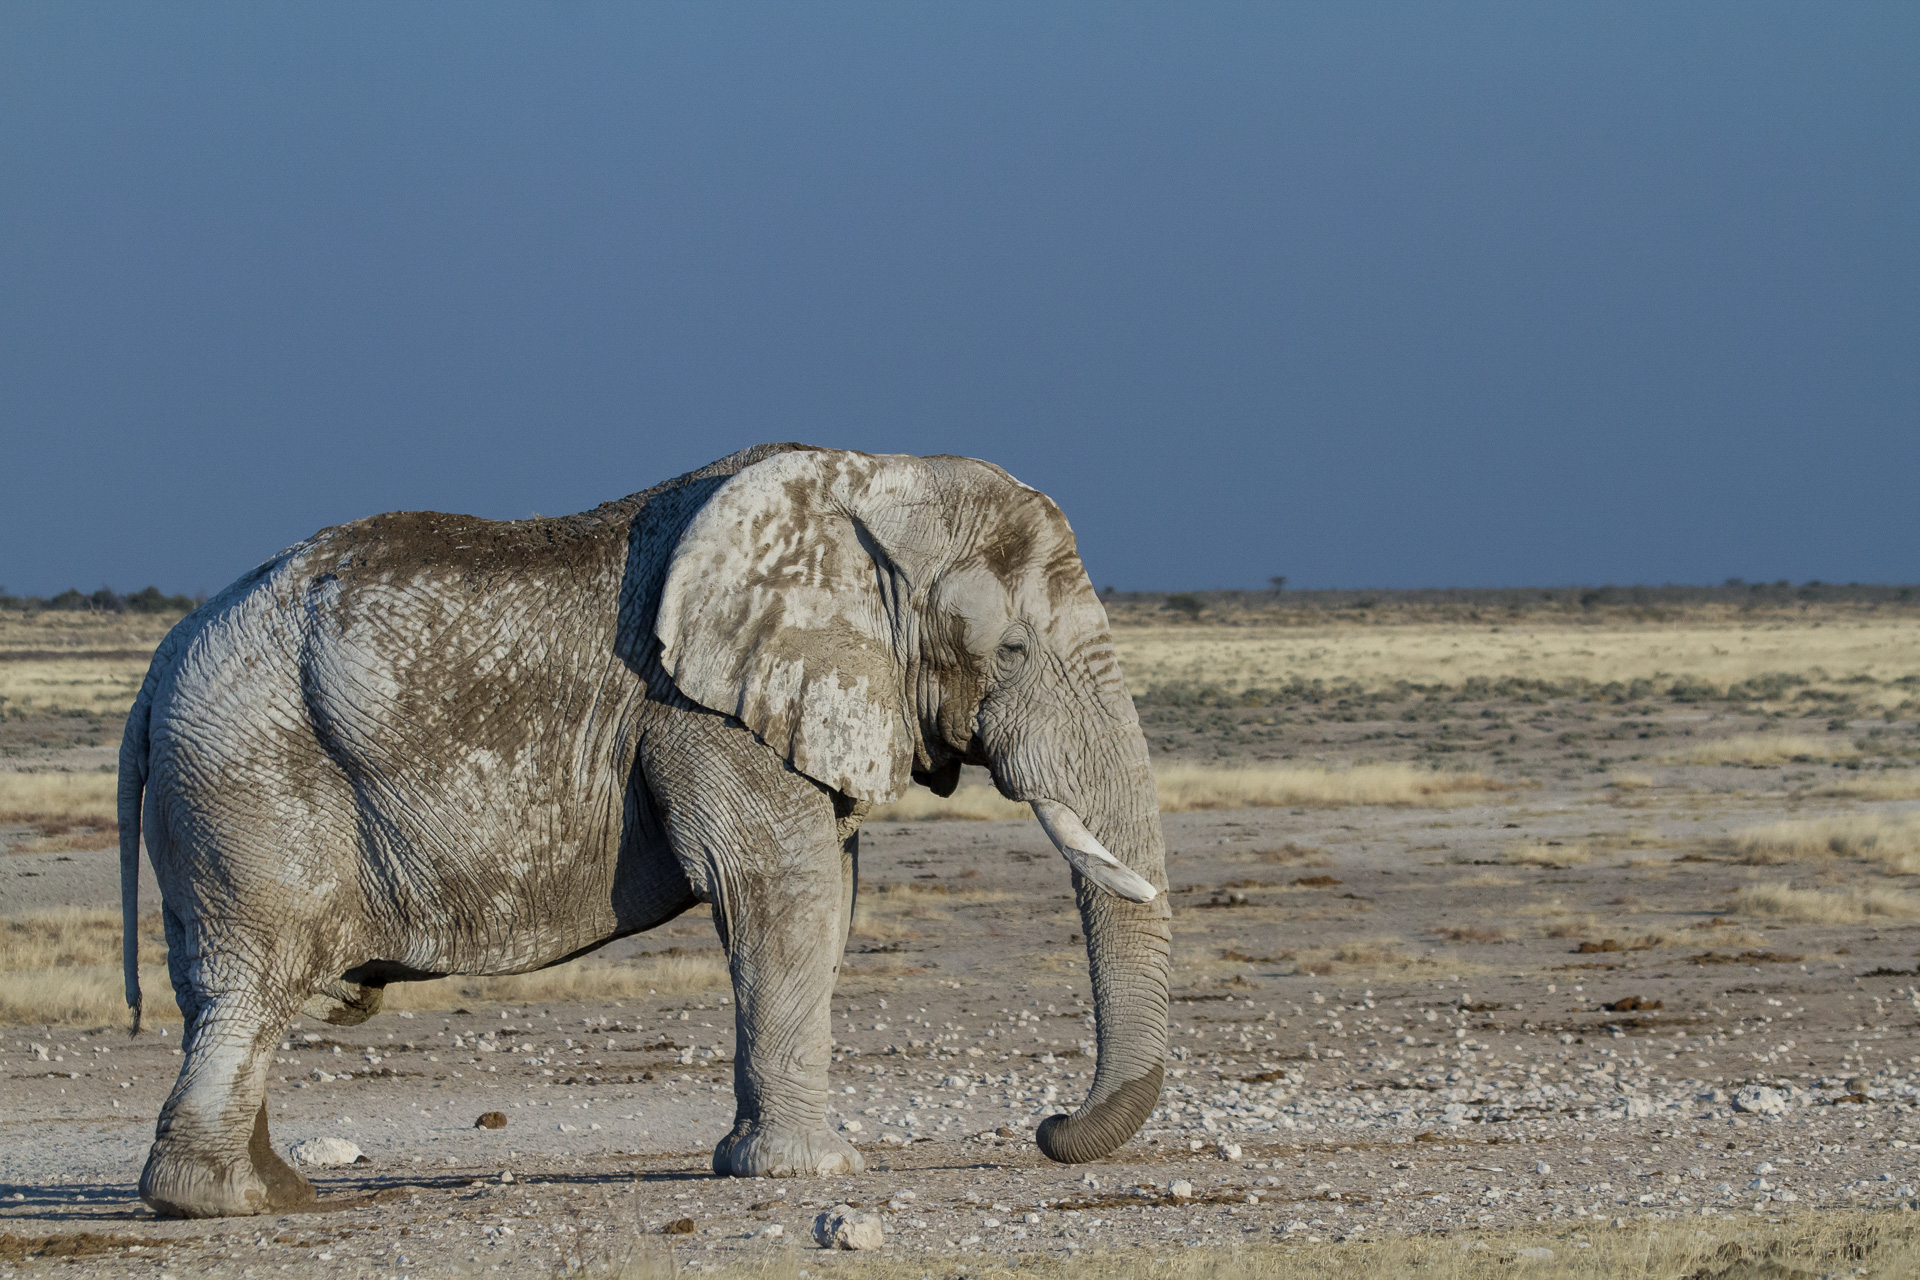 a large elephant standing in the middle of a desert